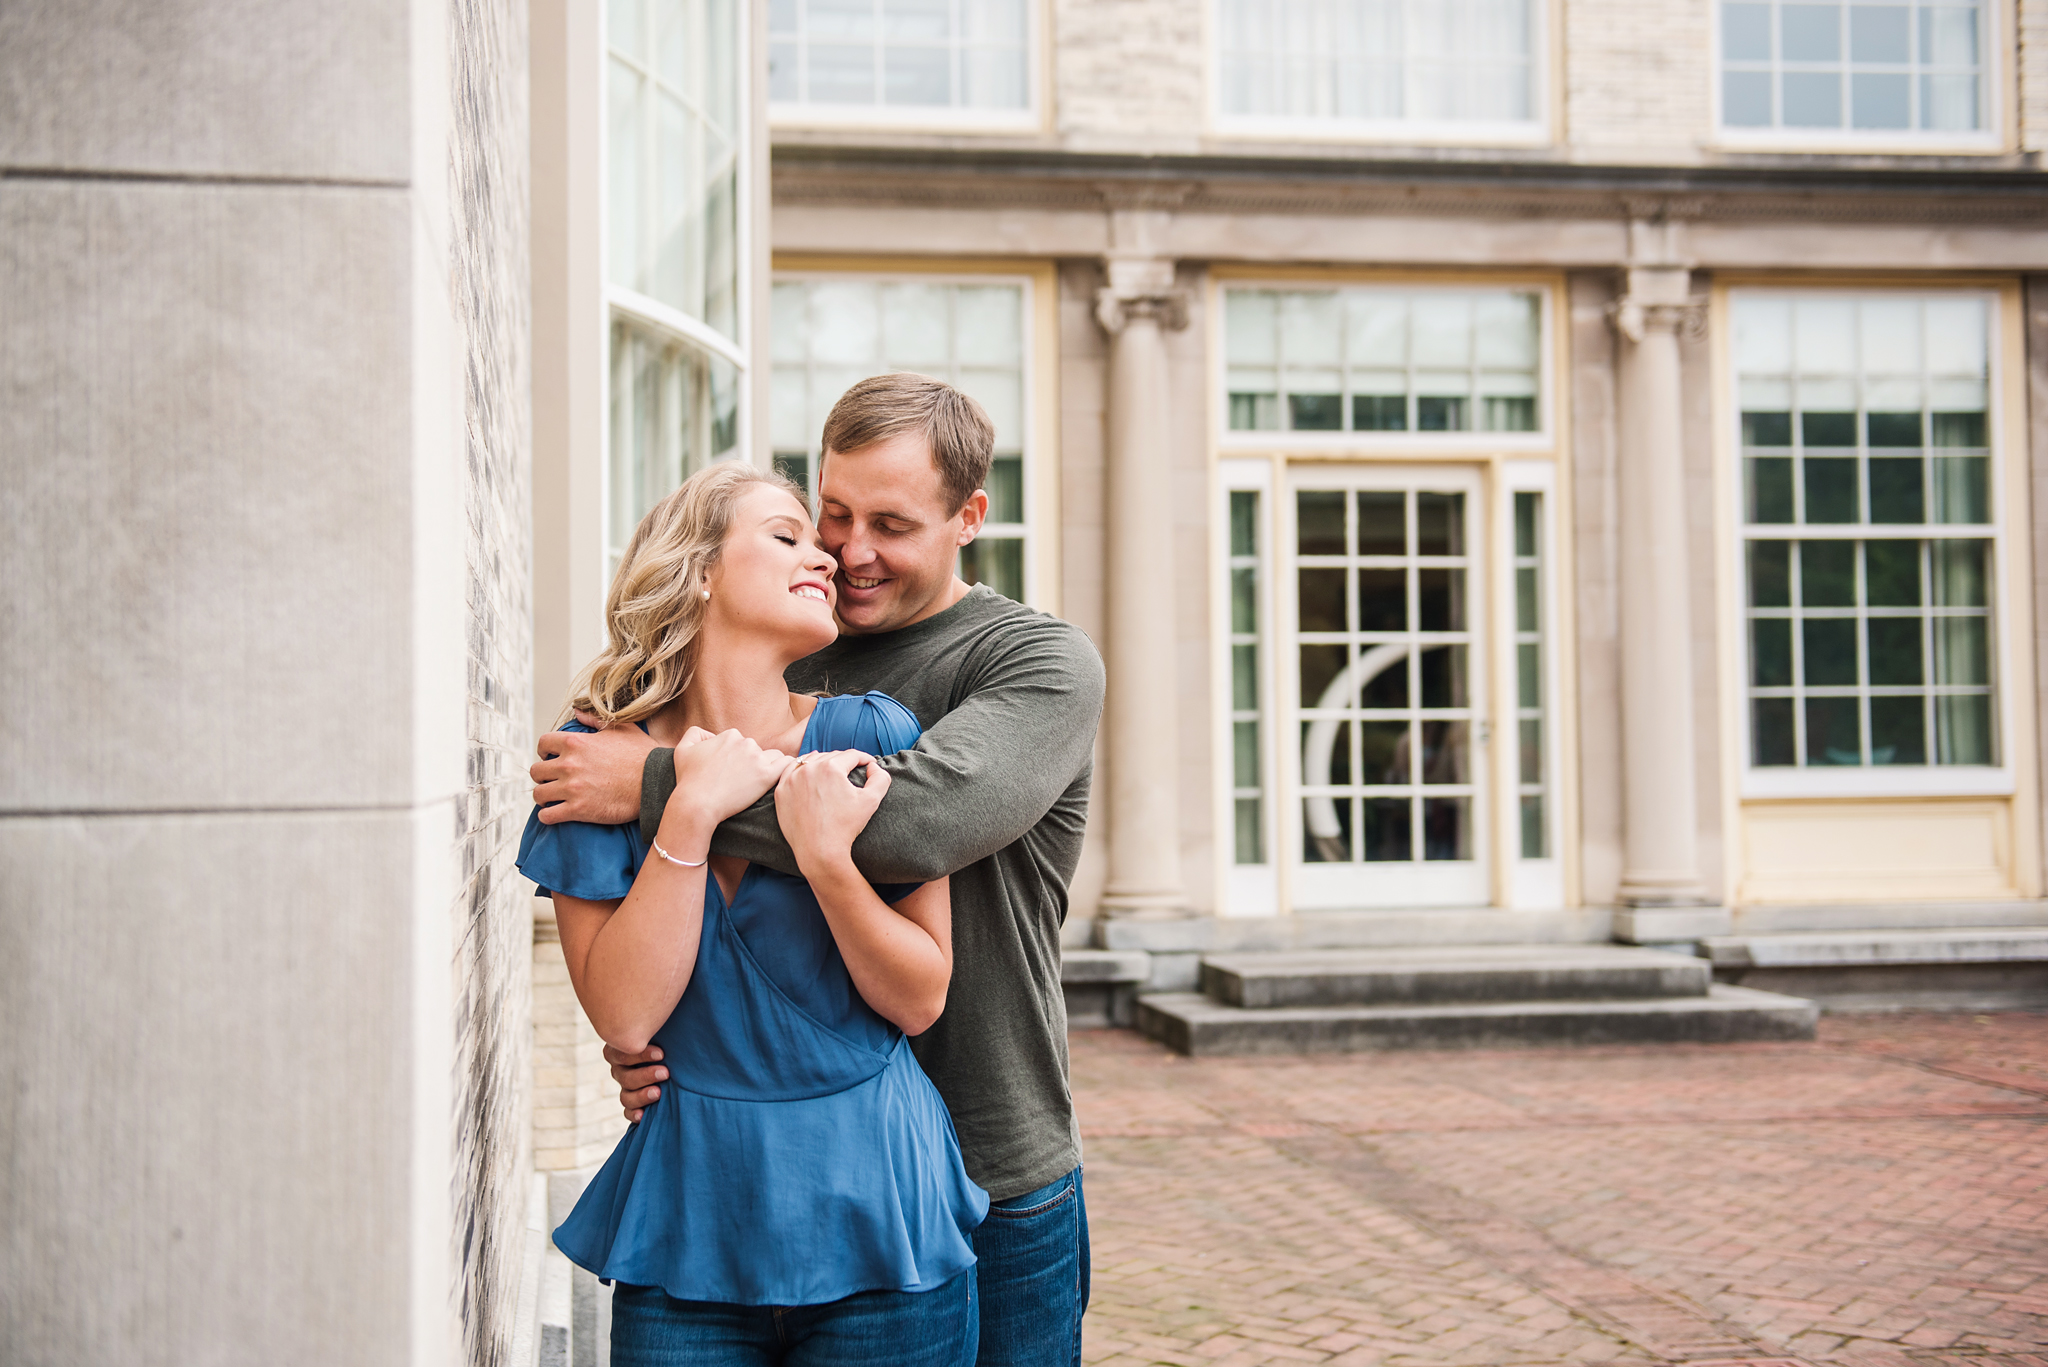 George_Eastman_House_Rochester_Yacht_Club_Rochester_Engagement_Session_JILL_STUDIO_Rochester_NY_Photographer_DSC_8099.jpg